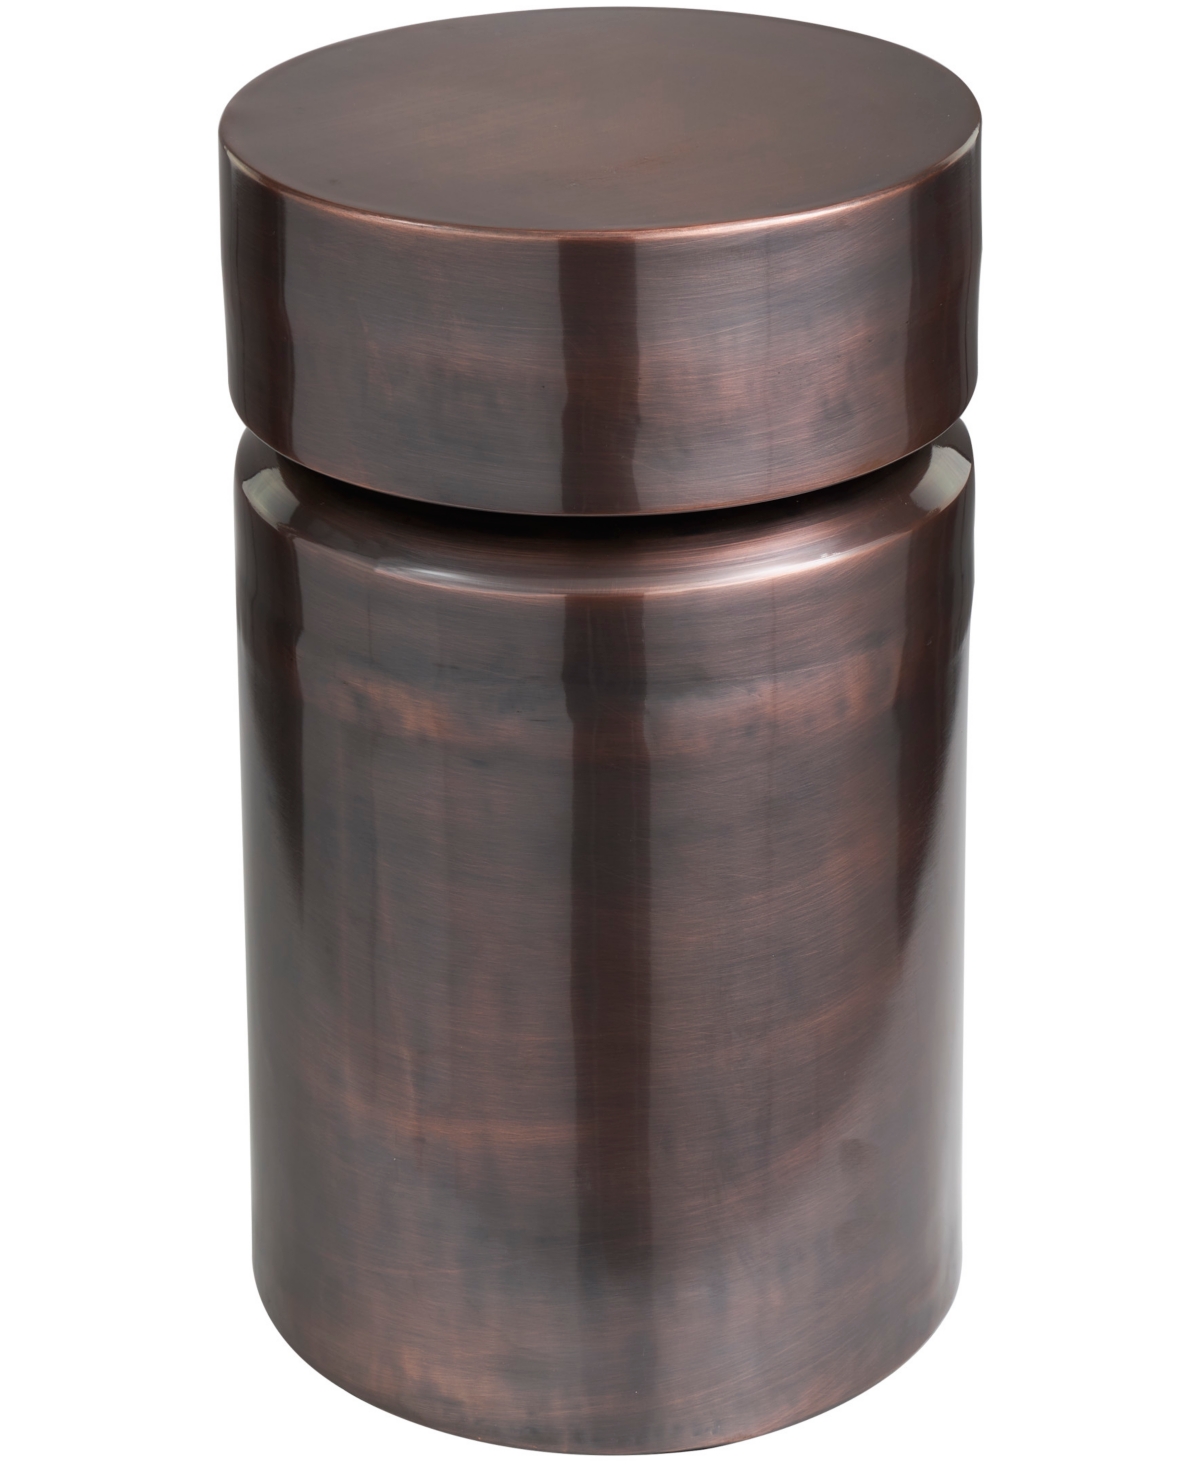 Rosemary Lane 19" Metal Drum Accent Table In Copper